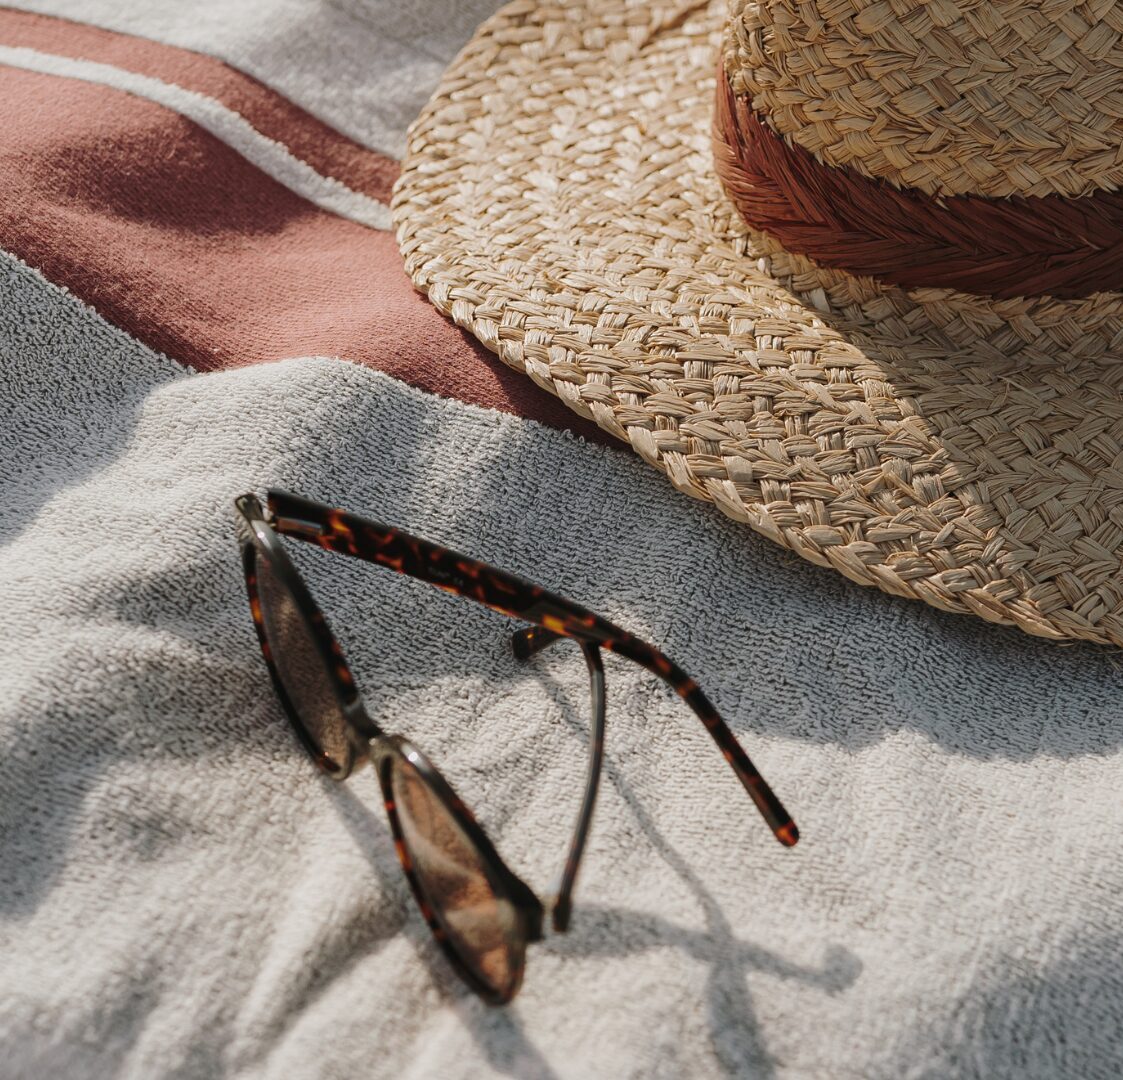 A pair of sunglasses and a summer hat on a sunlounger.